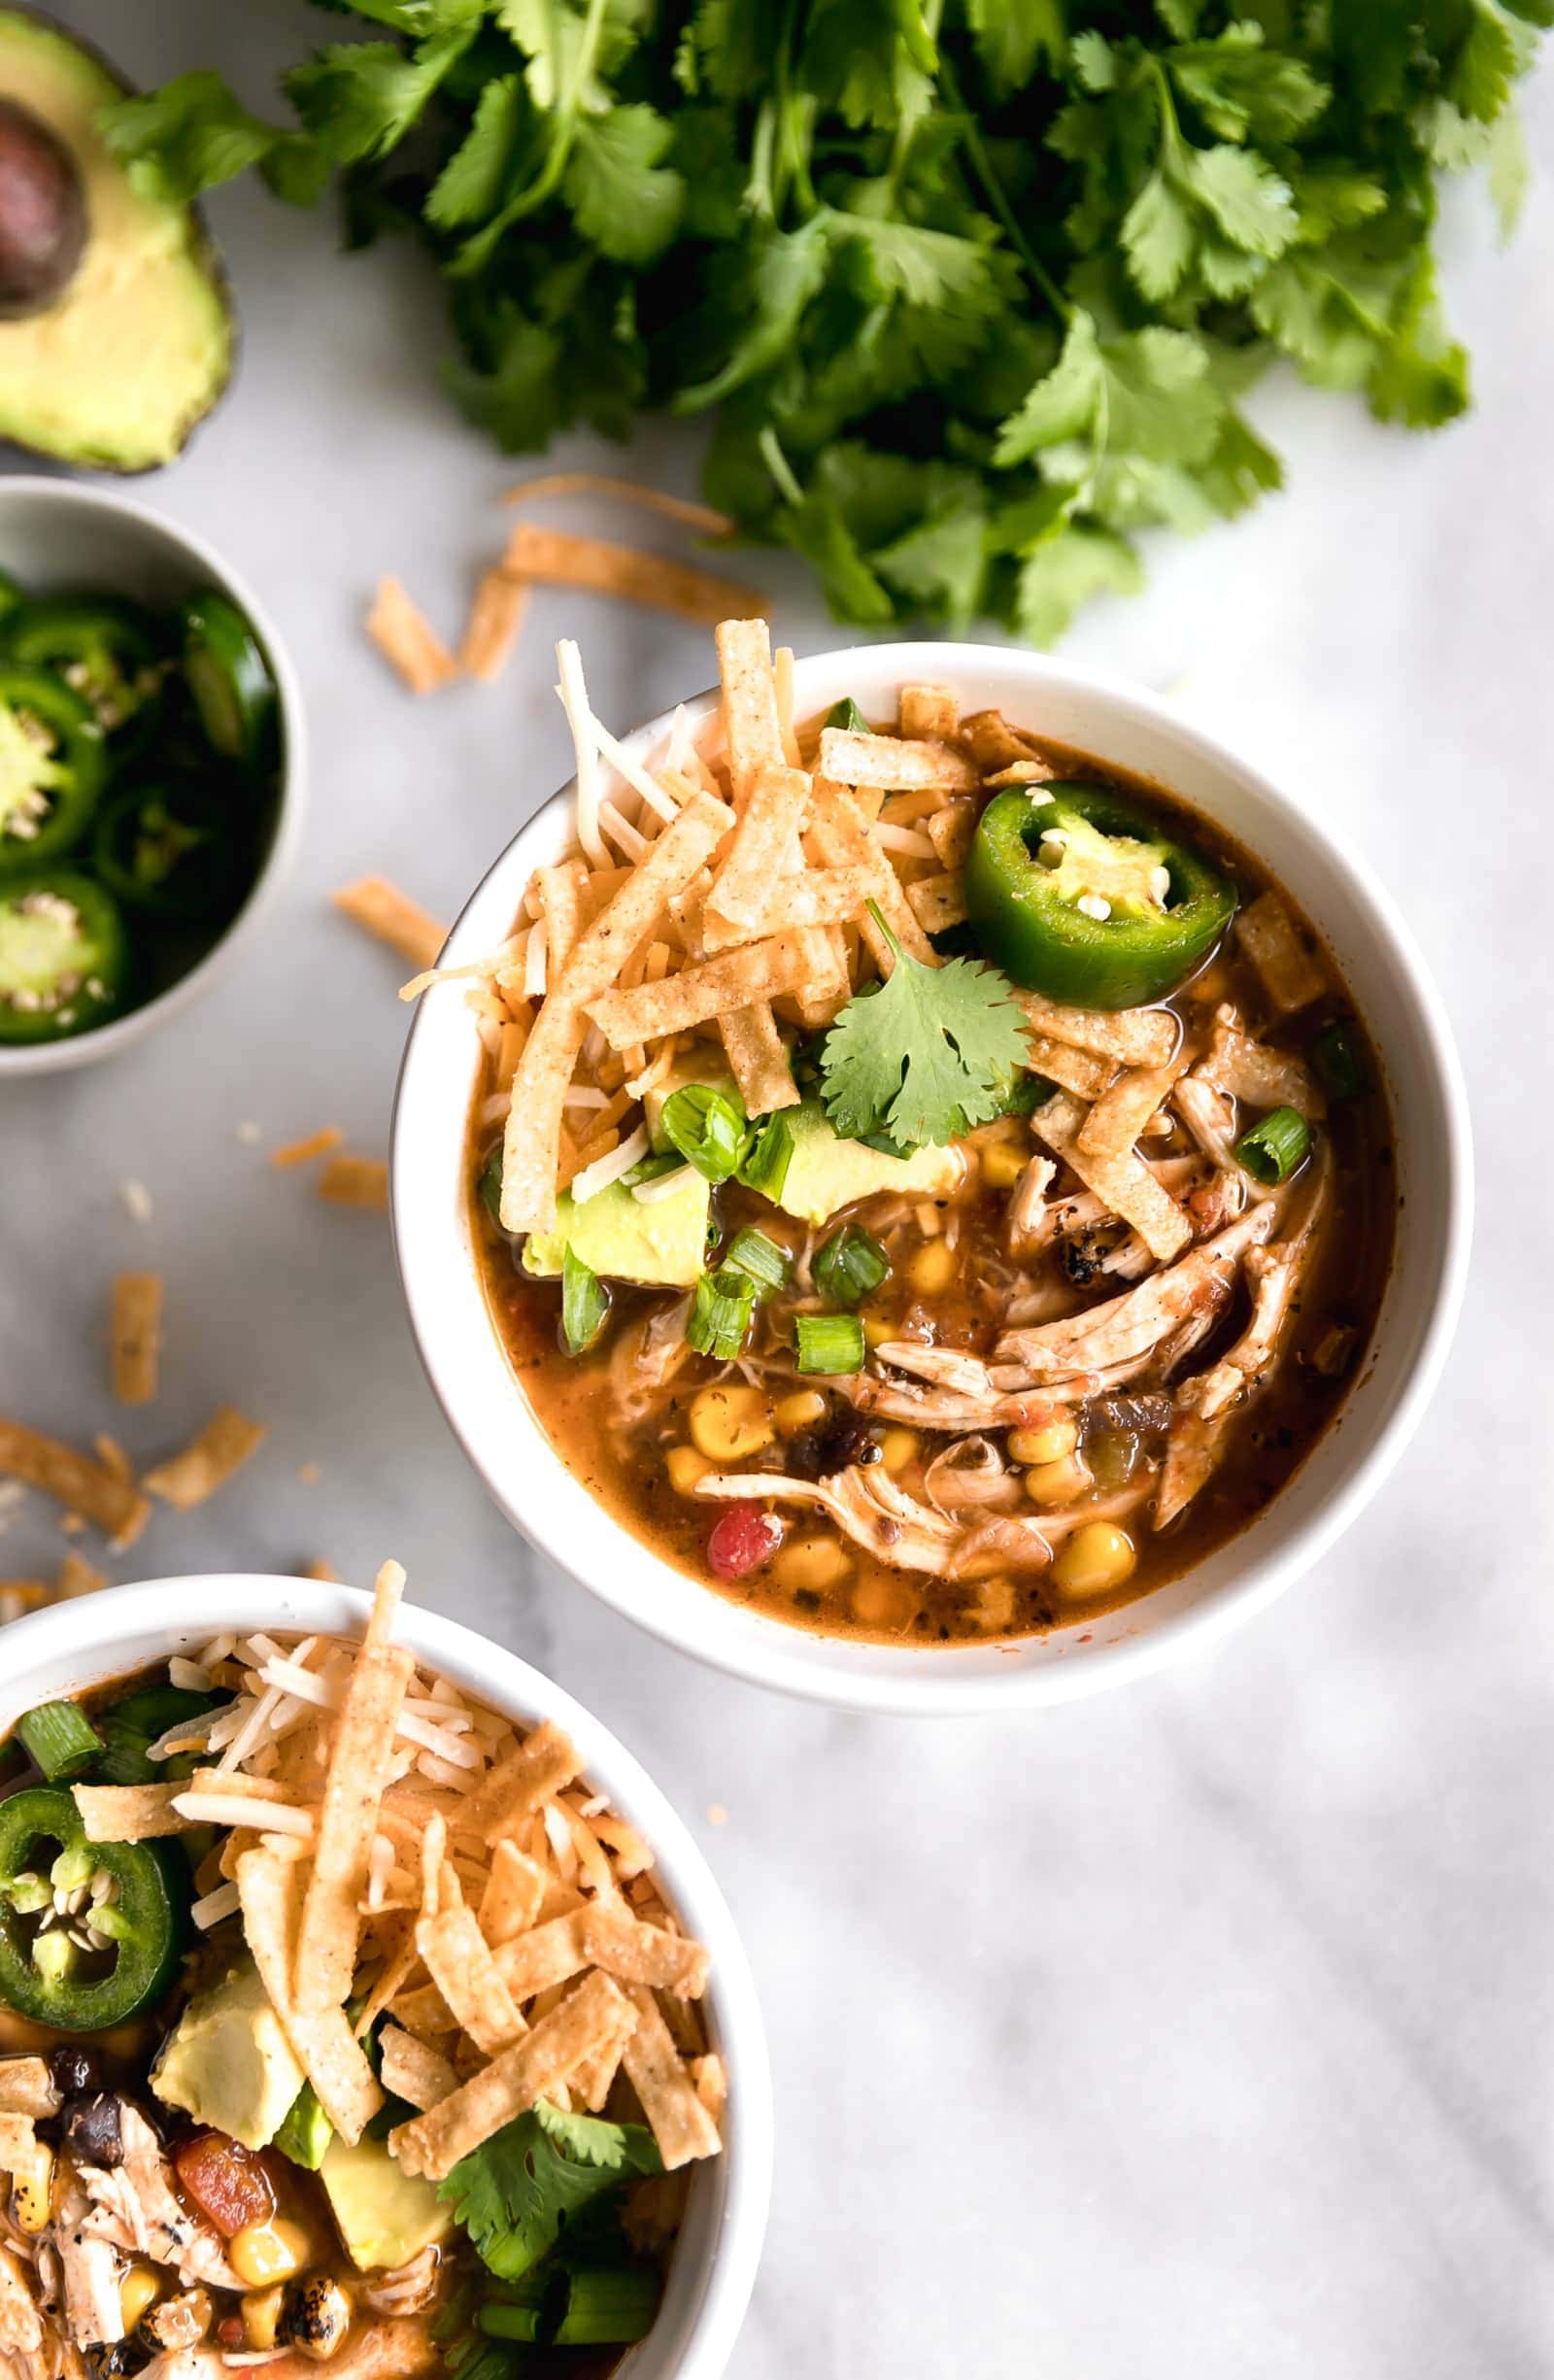 Chicken tortilla soup styled with cilantro leaves